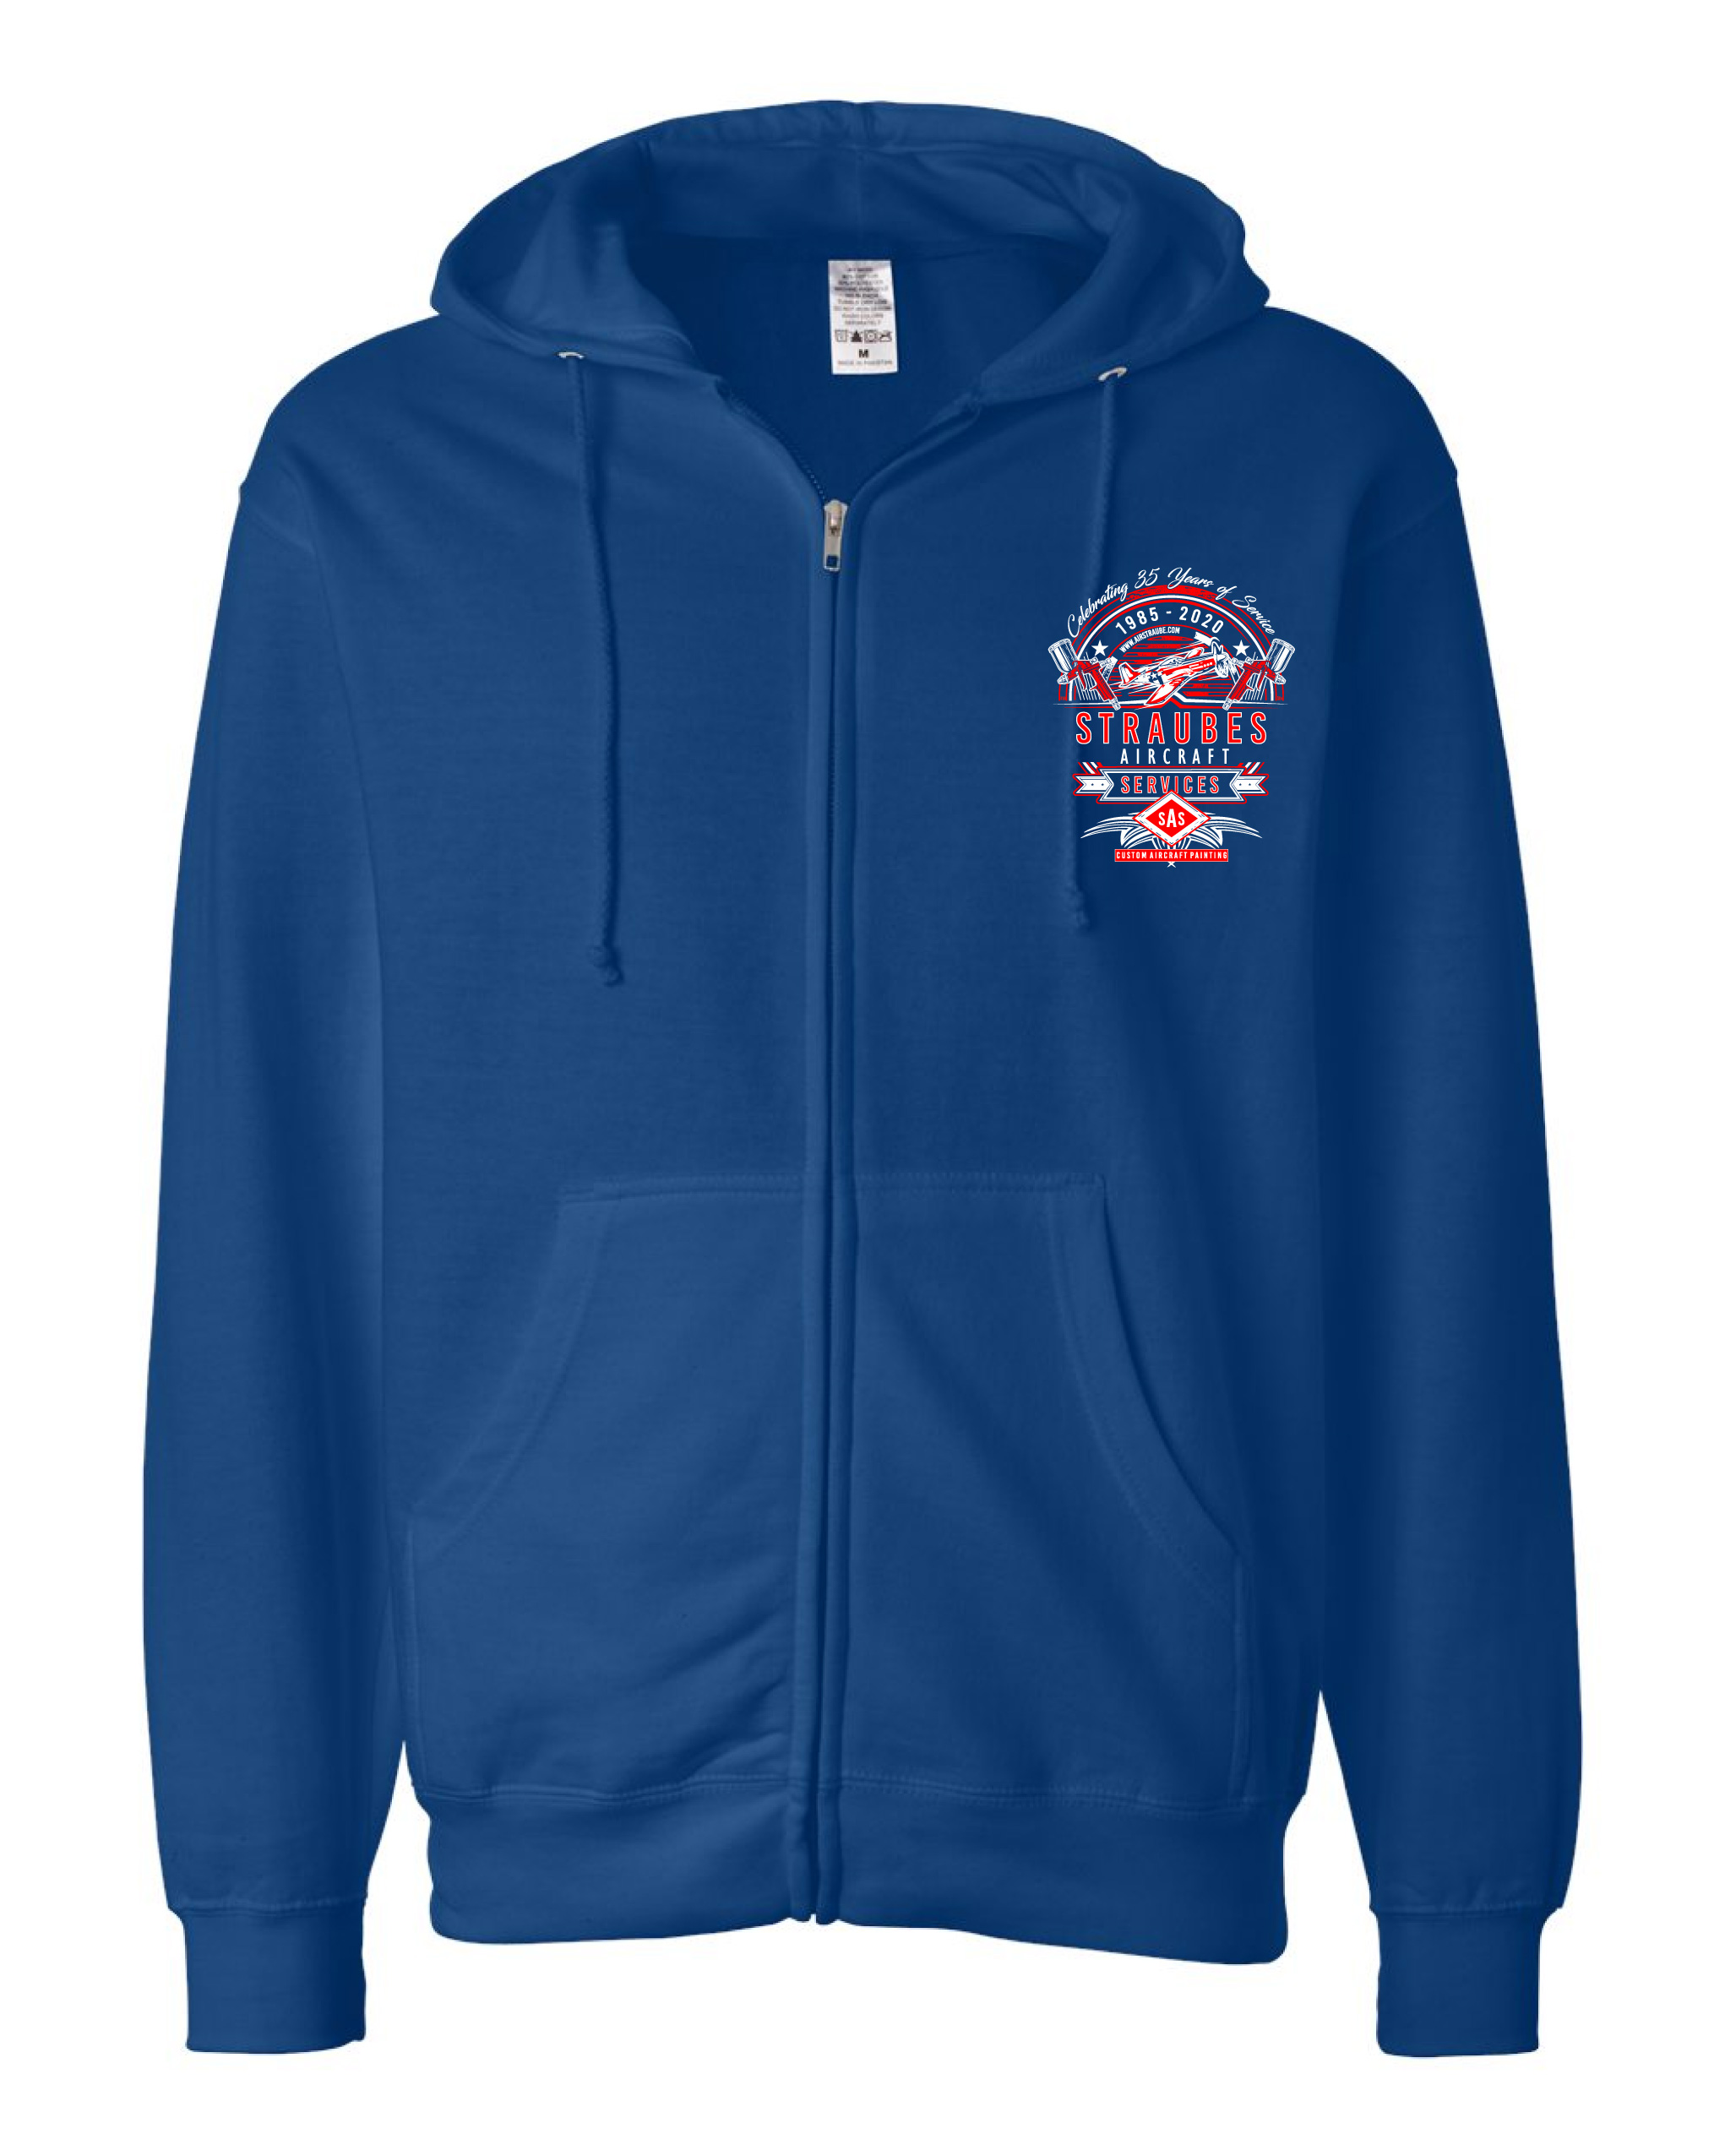 Download Limited Edition "35th" Anniversary Full-Zip Hooded ...